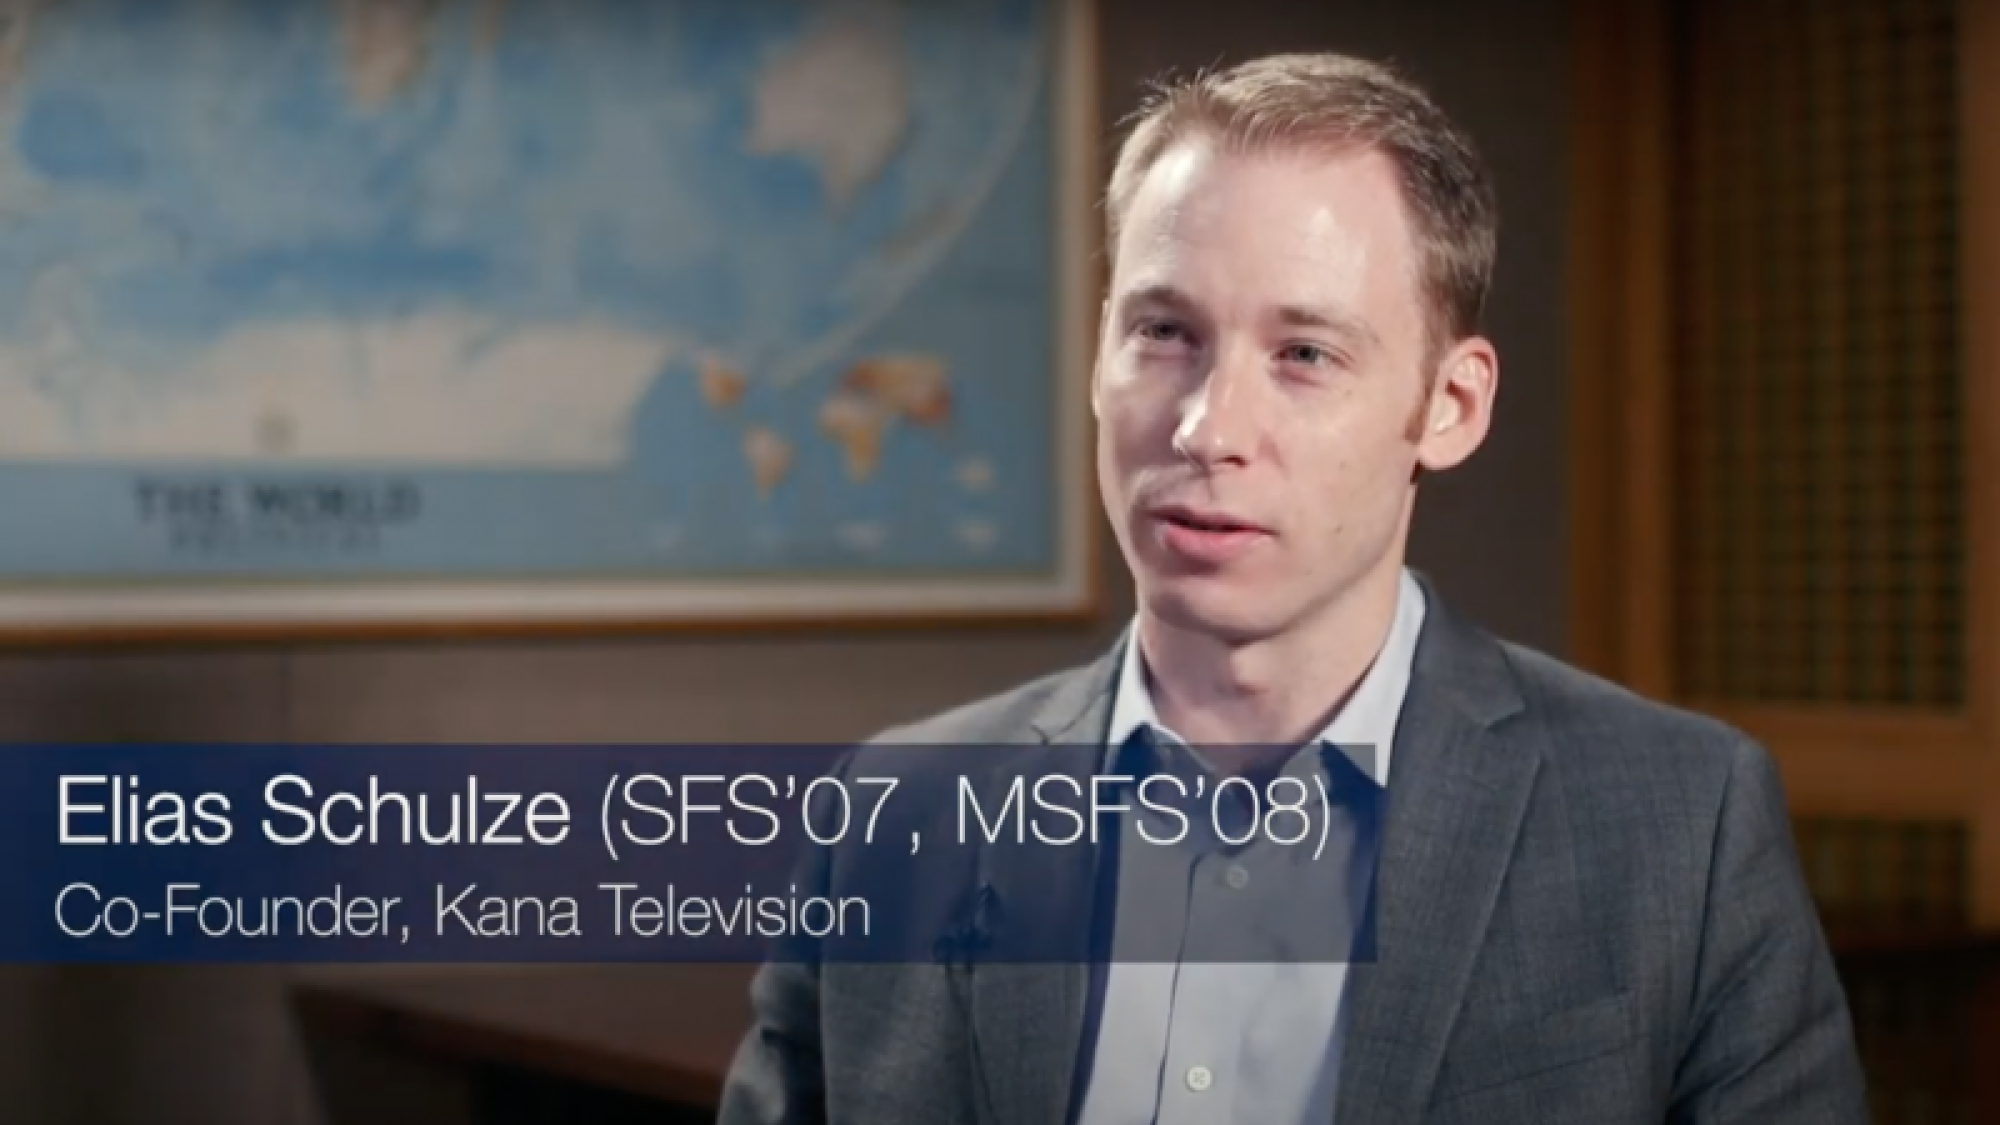 Co-Founder and Managing Director of Kana Television Elias Schulze (SFS'07, MSFS'08)